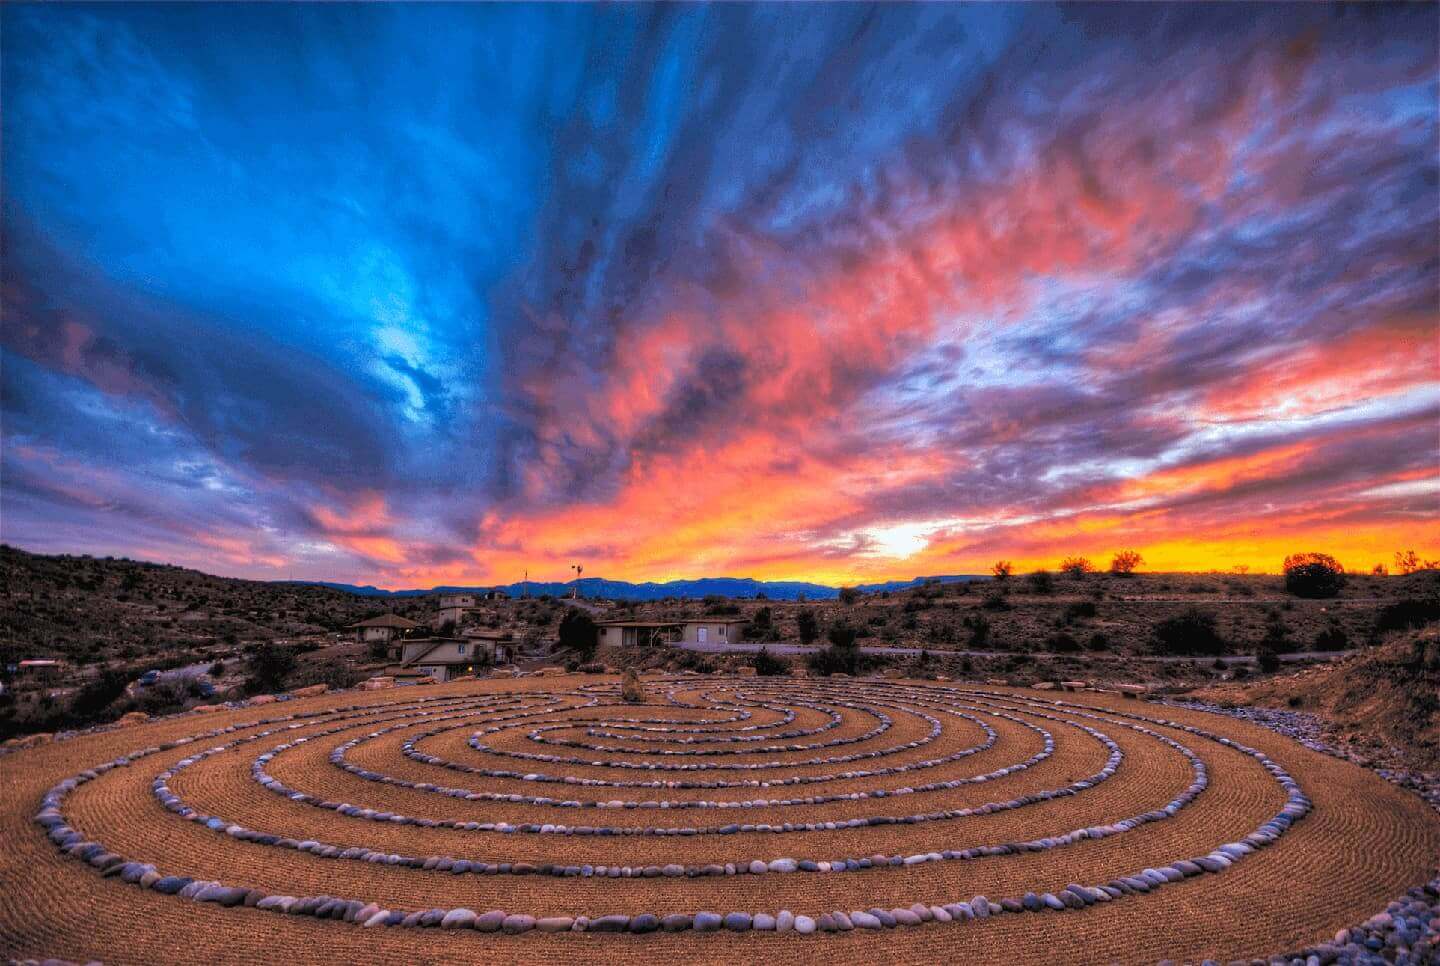 Walking labyrinth path at The Sanctuary with a beautiful sunset in the background